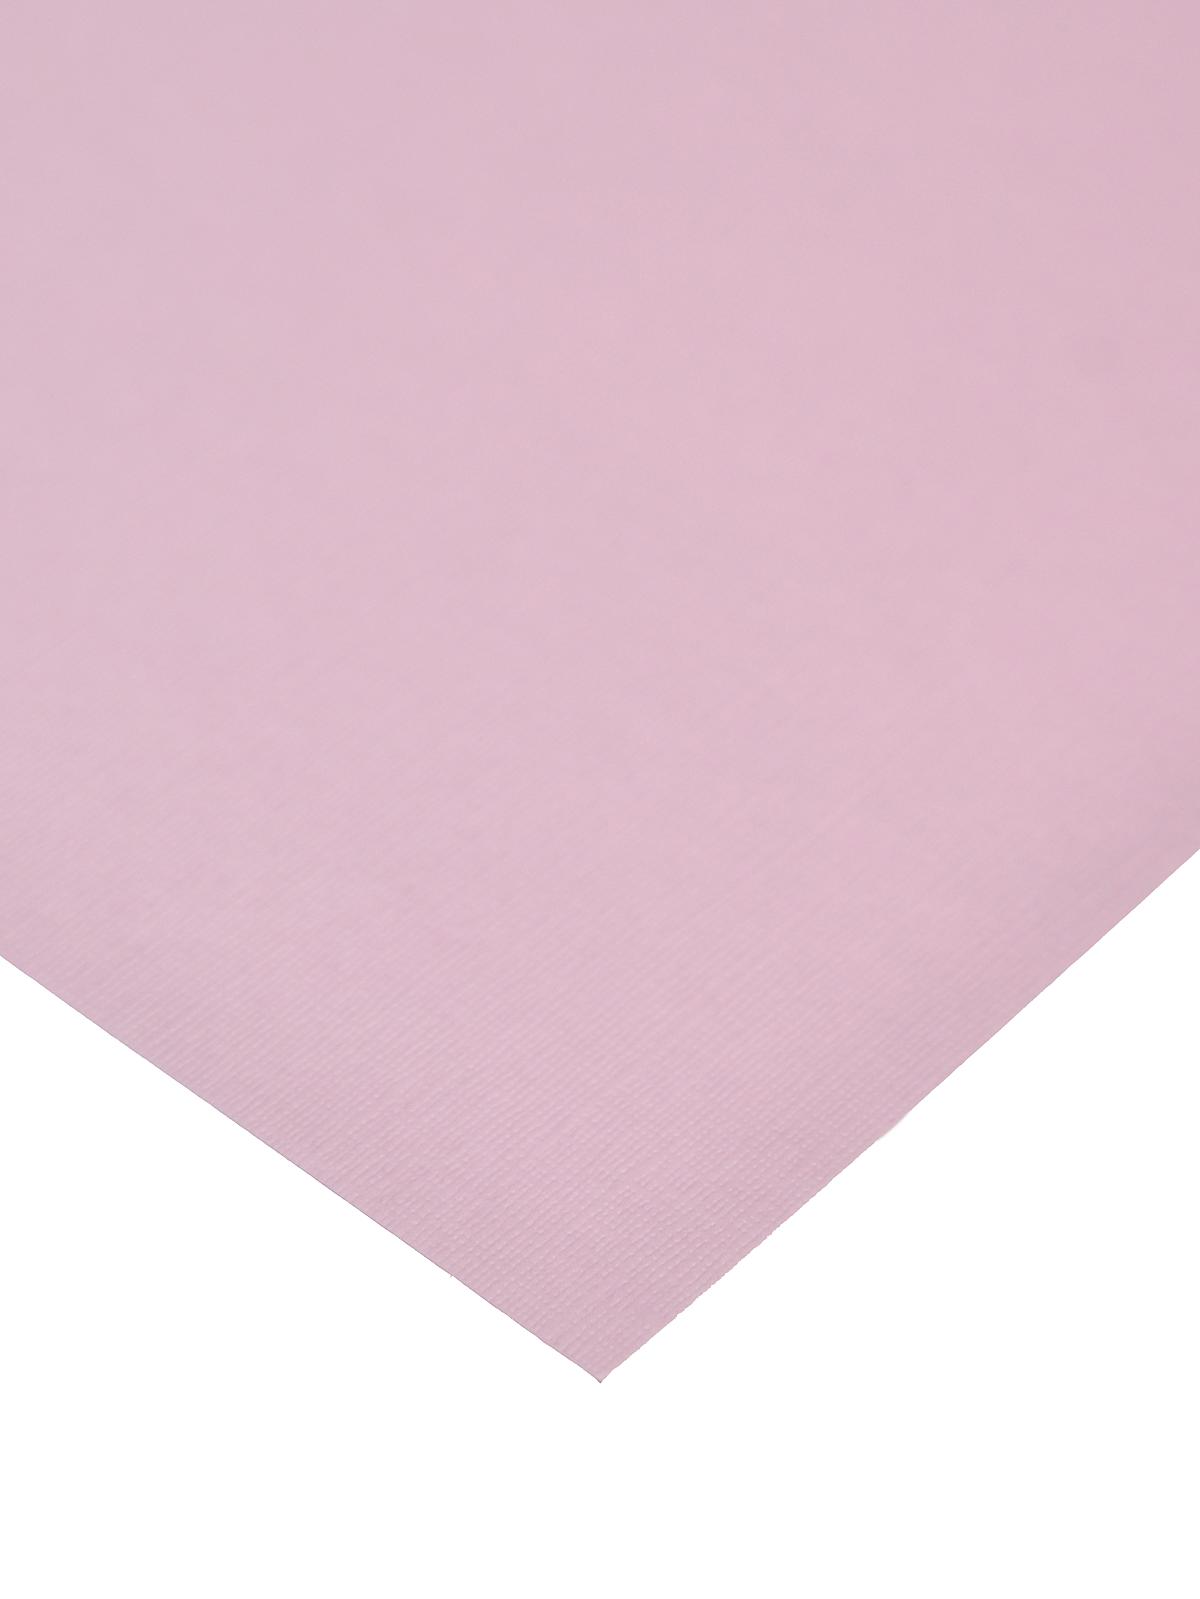 80 Lb. Canvas 8.5 In. X 11 In. Sheet Pale Blossom